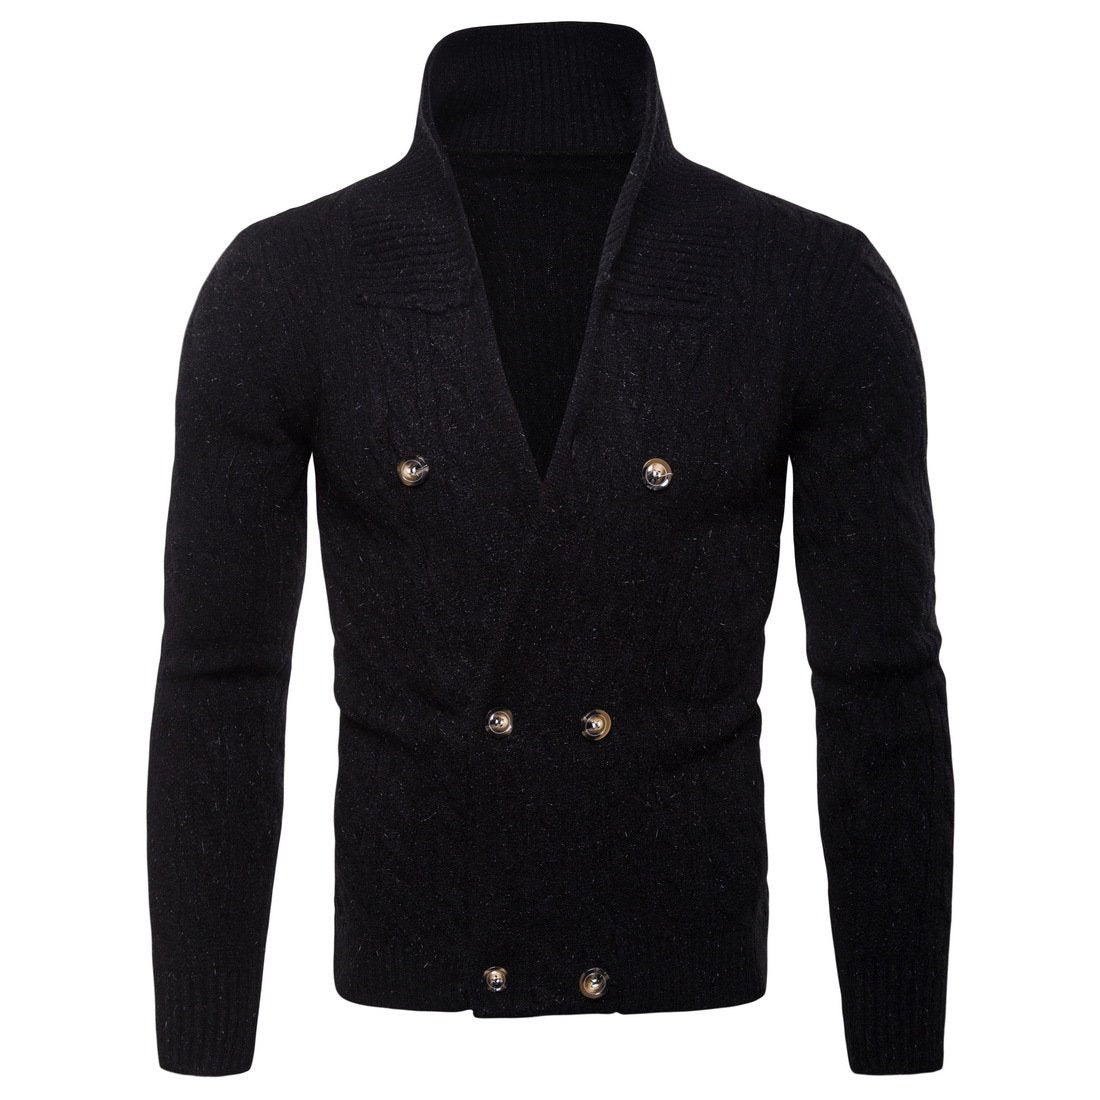 Men’s Relax Fit V-Neck Cardigan Sweater